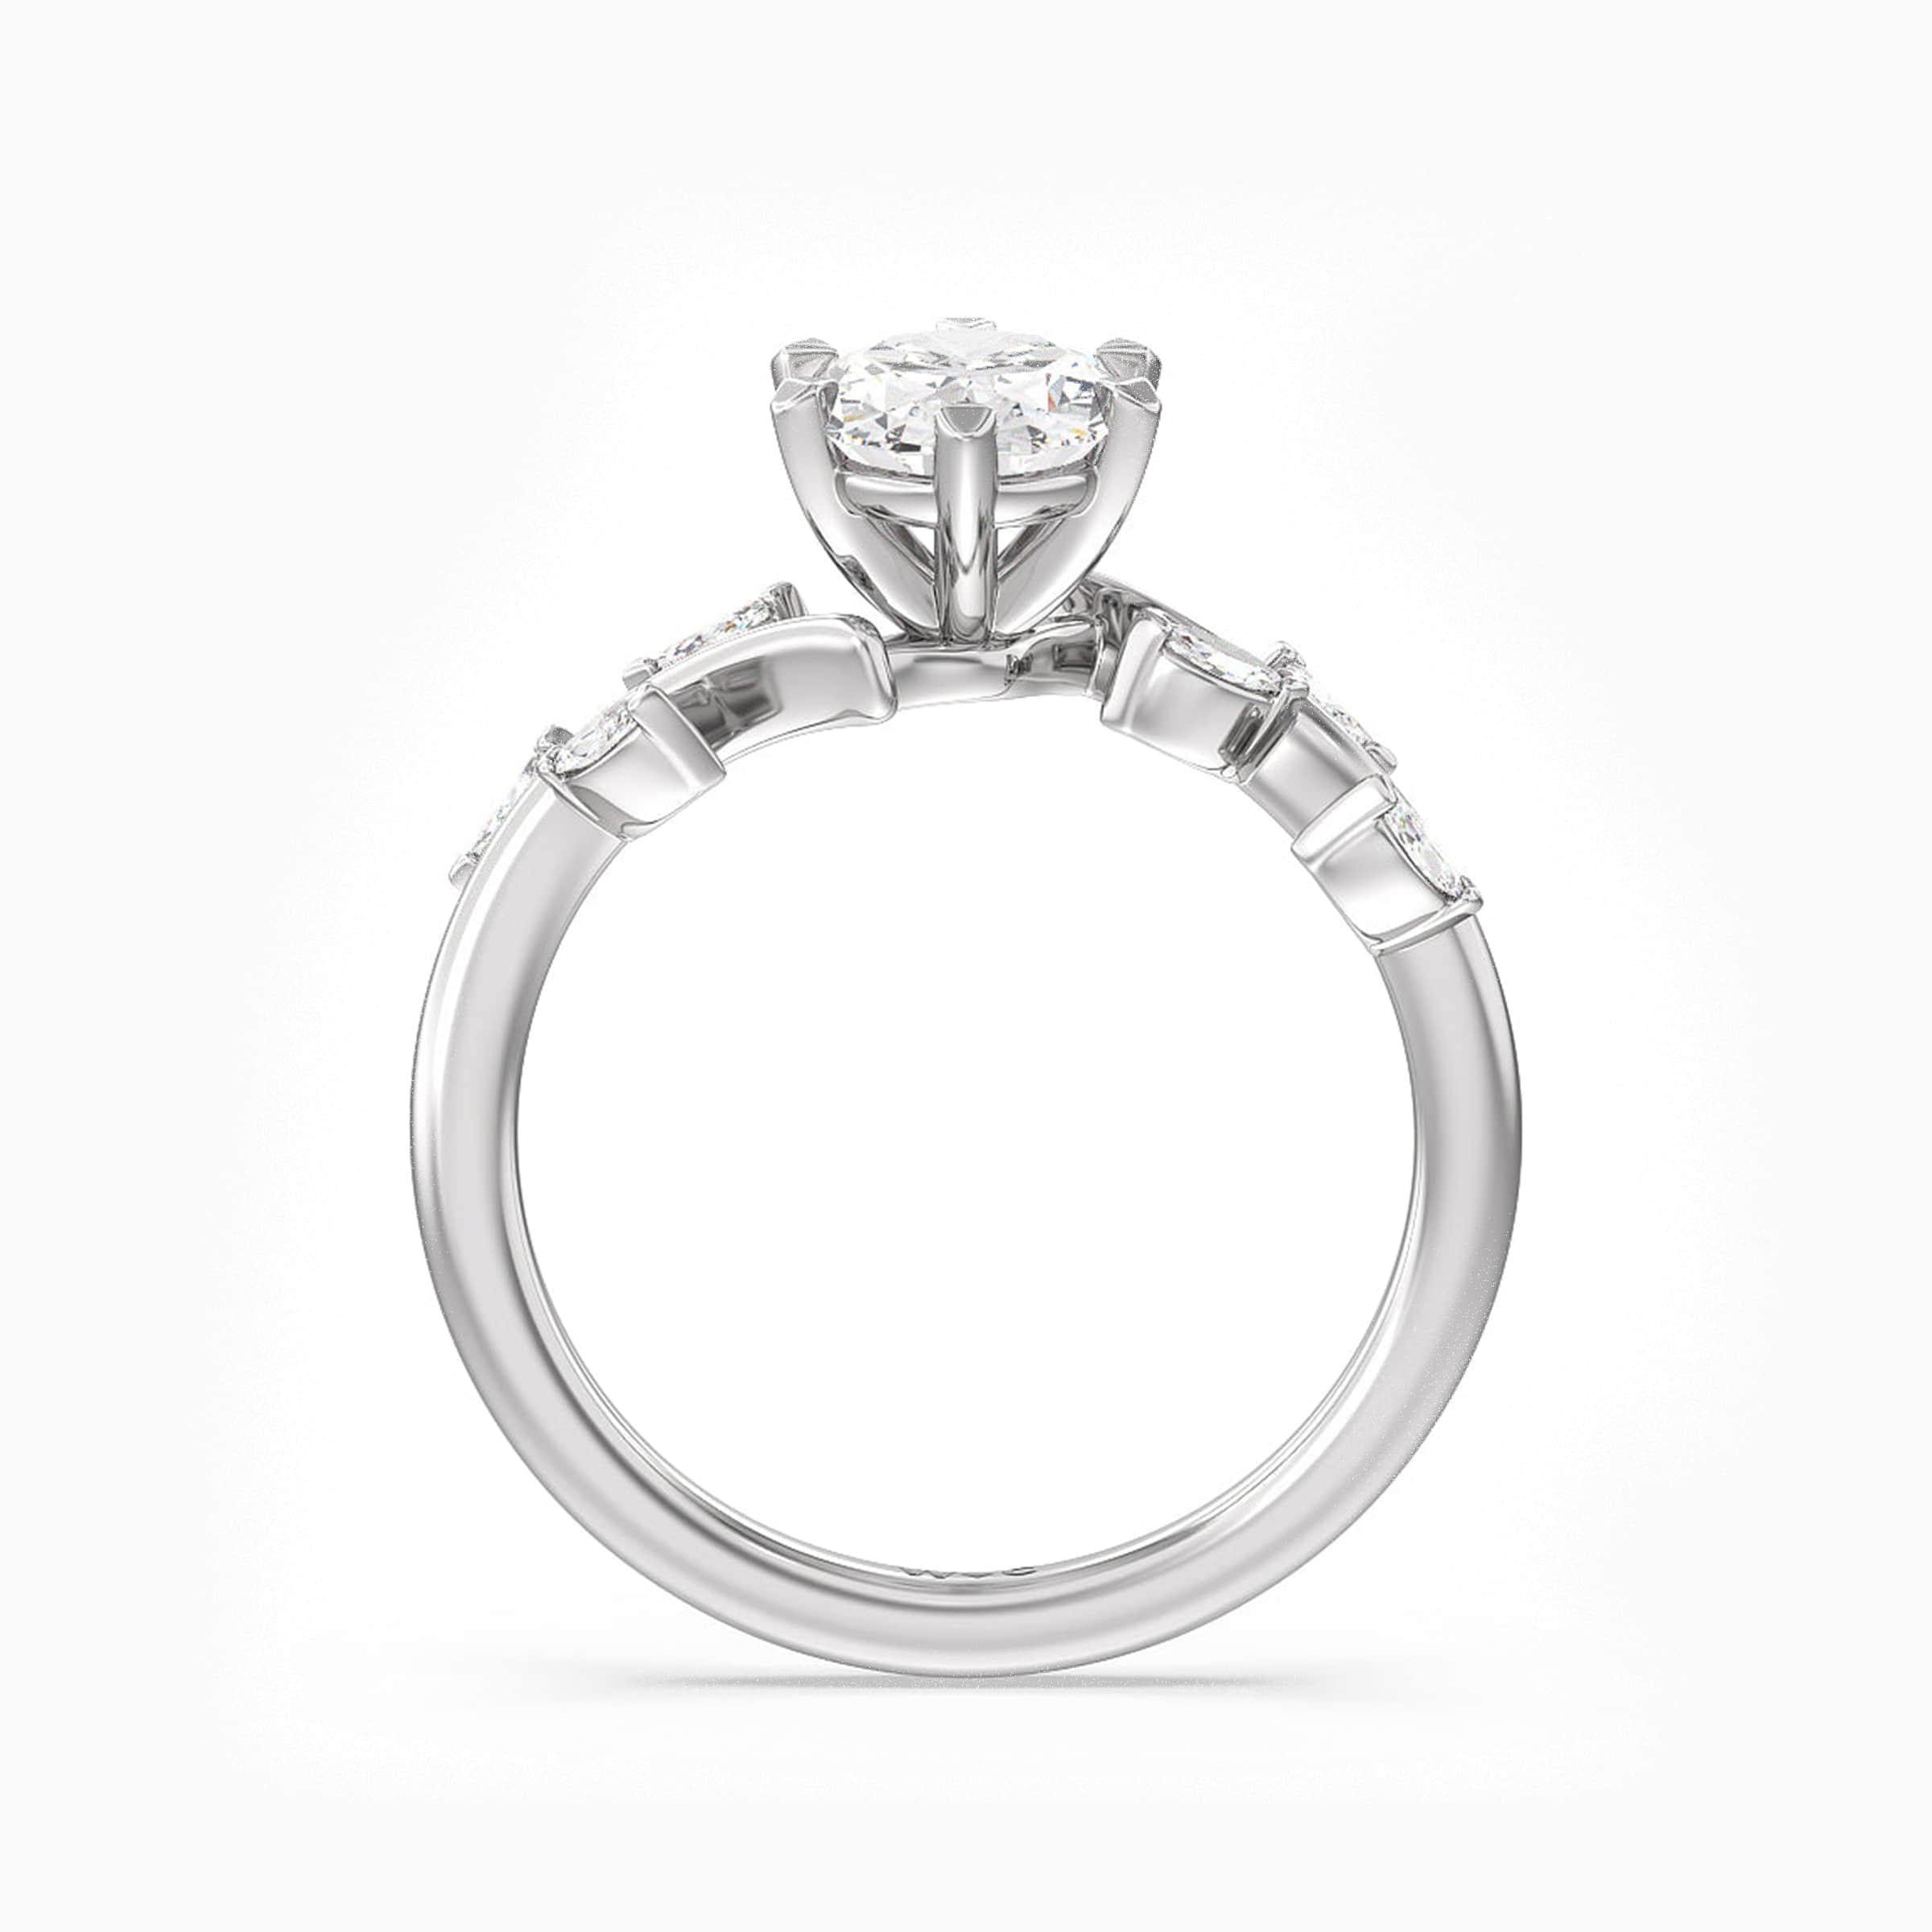 Darry Ring oval diamond bypass engagement ring front view